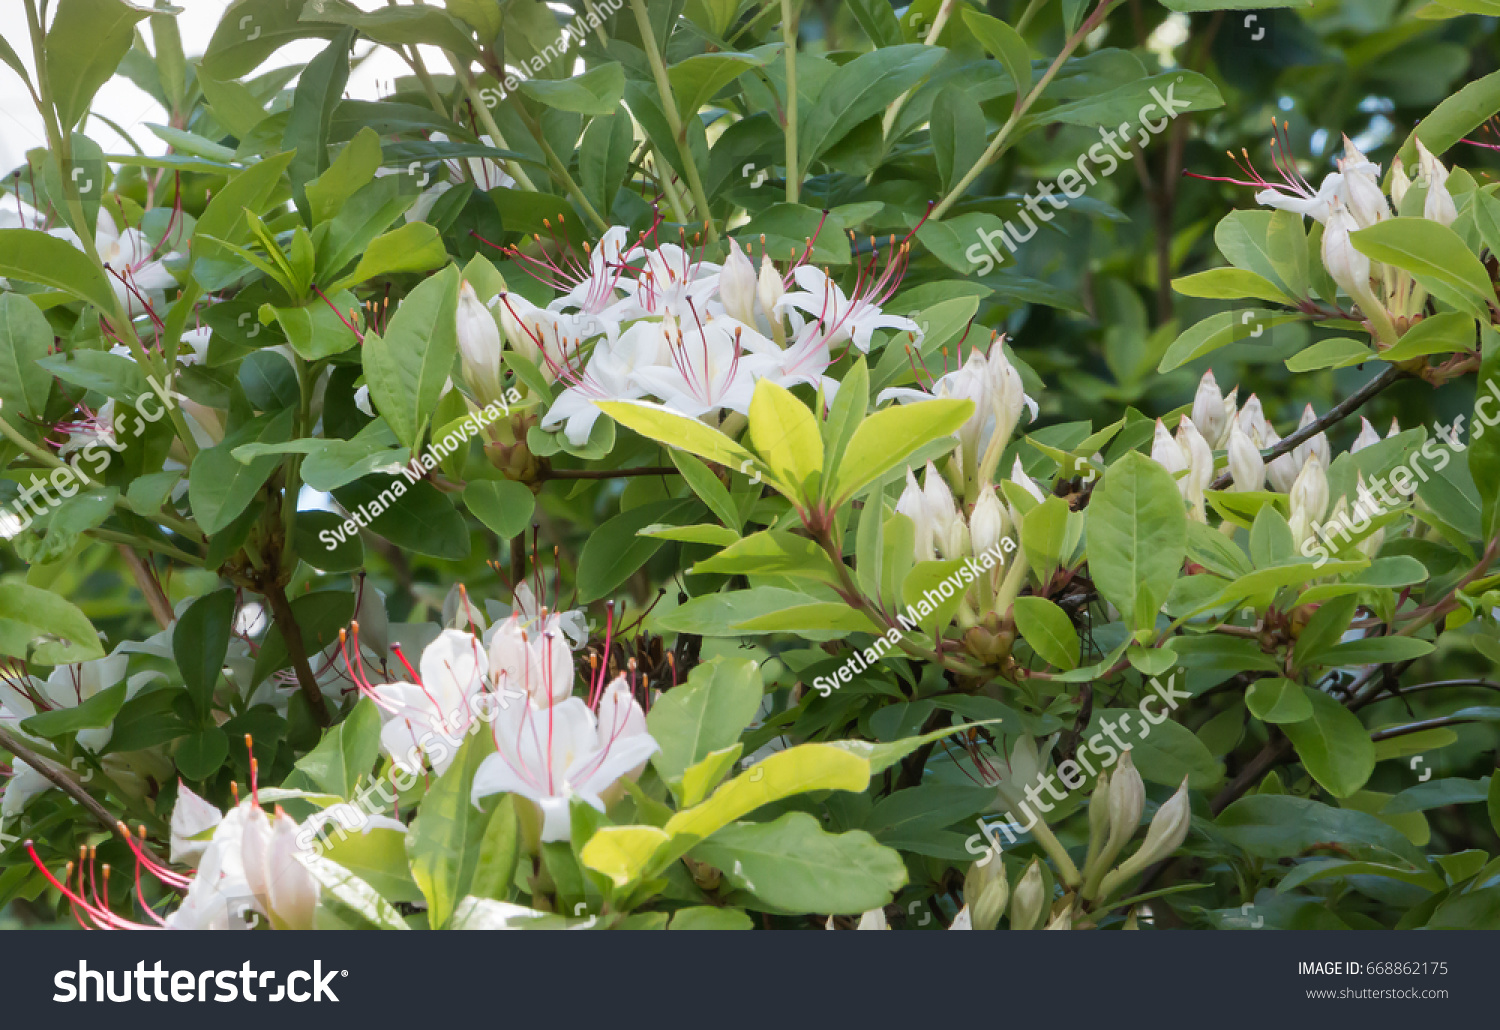 Rhododendron Arborescens Known Smooth Azalea Sweet Nature Stock Image 668862175